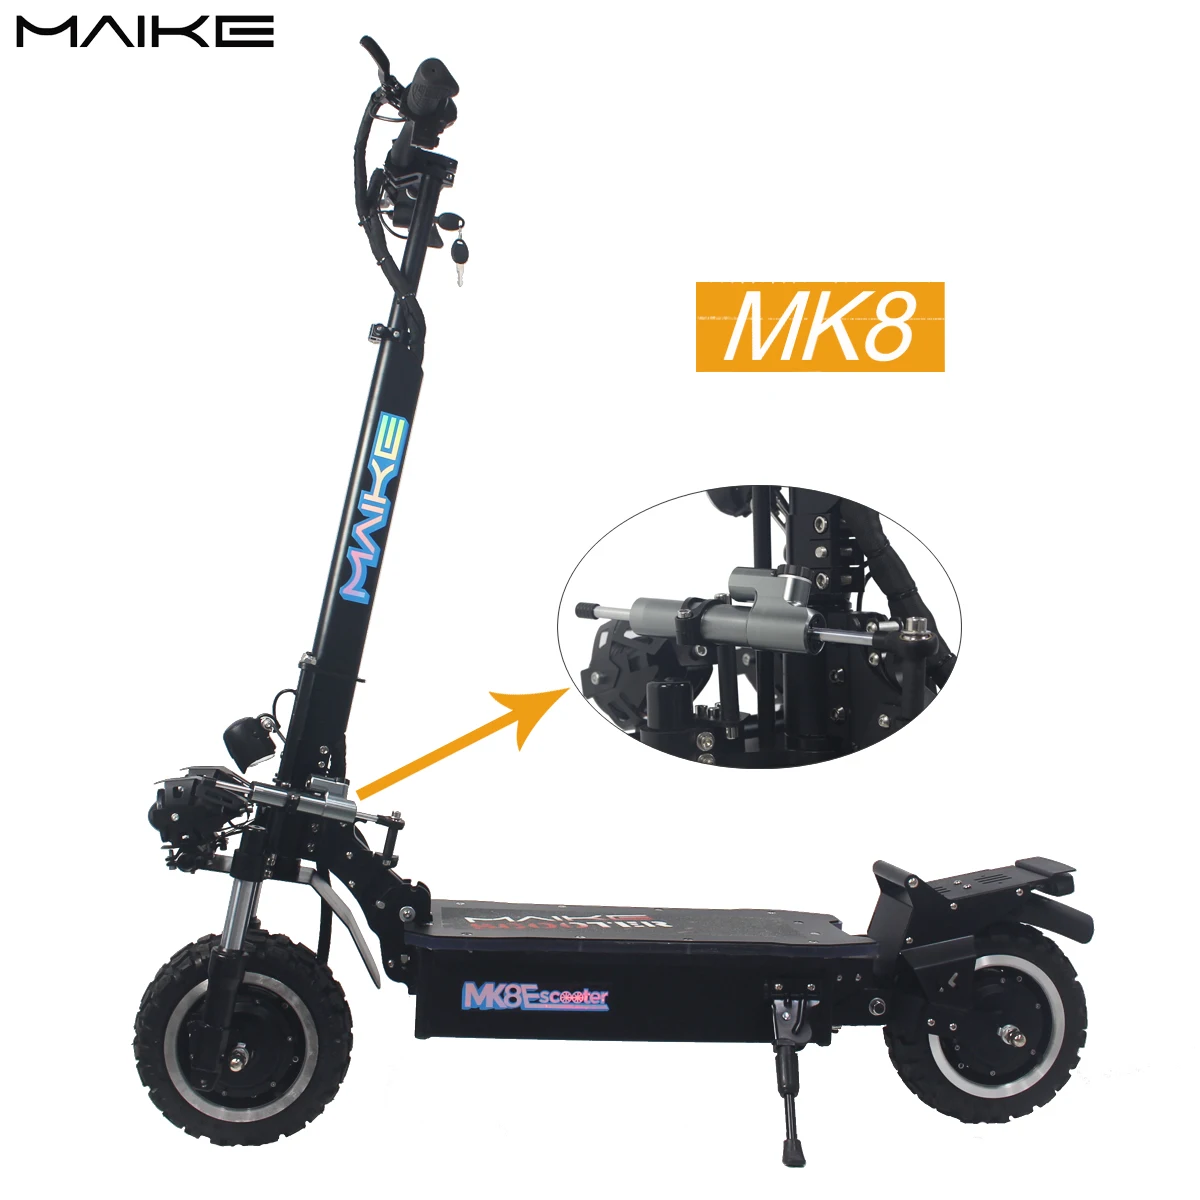 

Maike mk8 hot sale electric scooter fast 60v 5000w dual motor high speed 85km/h long range off road power electric scooter